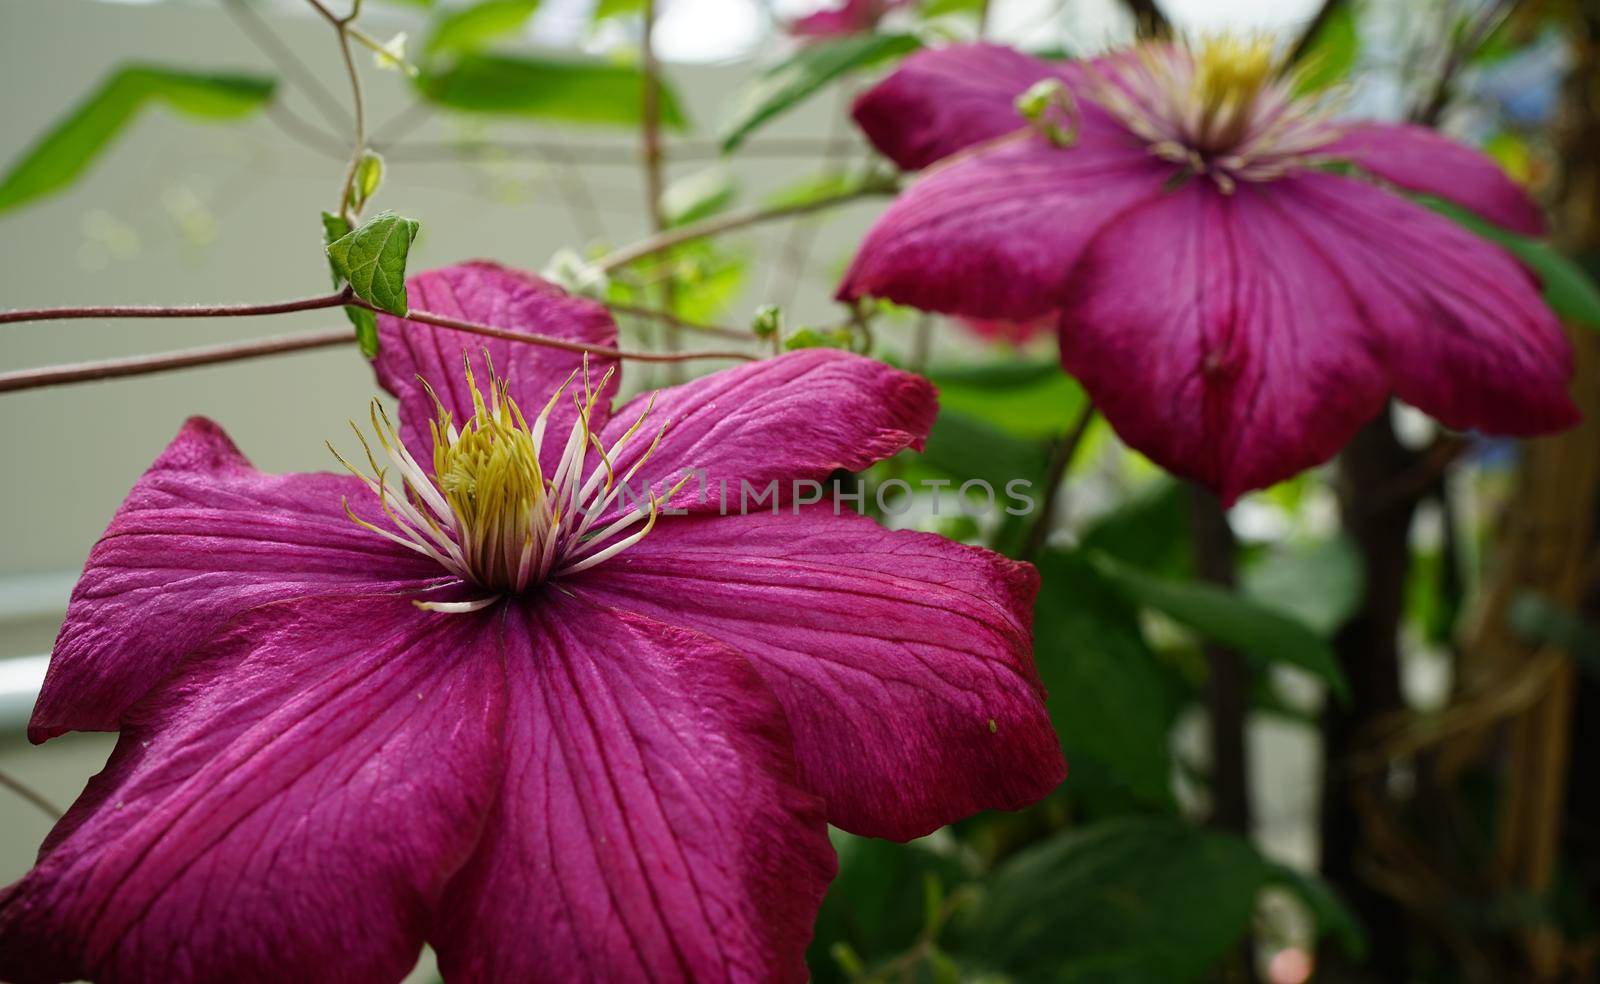 Clematis hybrid with large dark red flowers